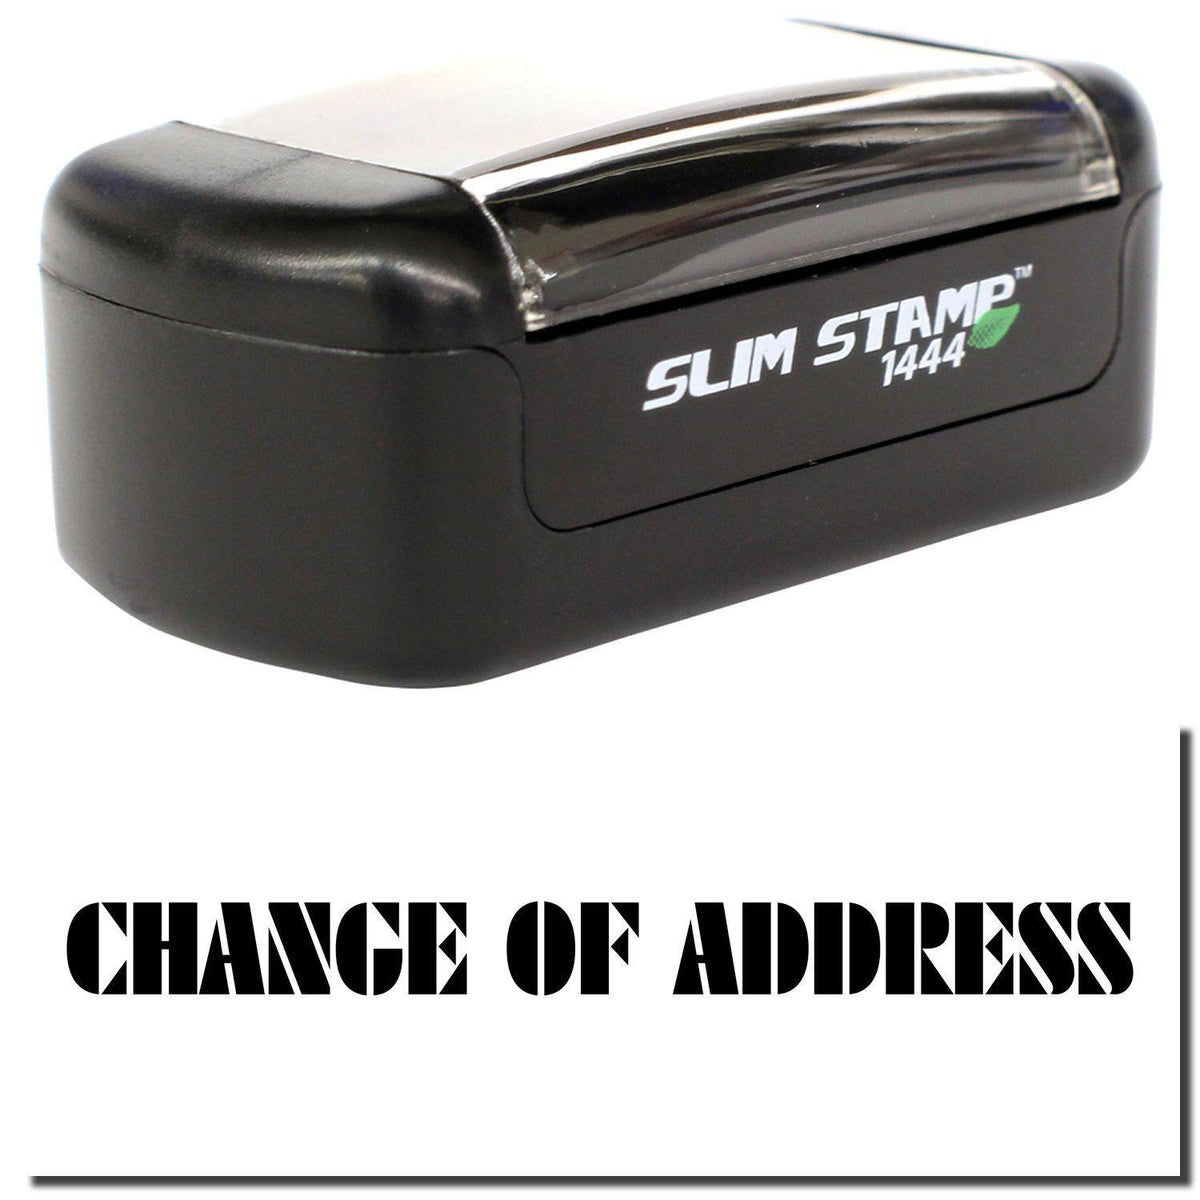 A stock office pre-inked stamp with a stamped image showing how the text &quot;CHANGE OF ADDRESS&quot; is displayed after stamping.